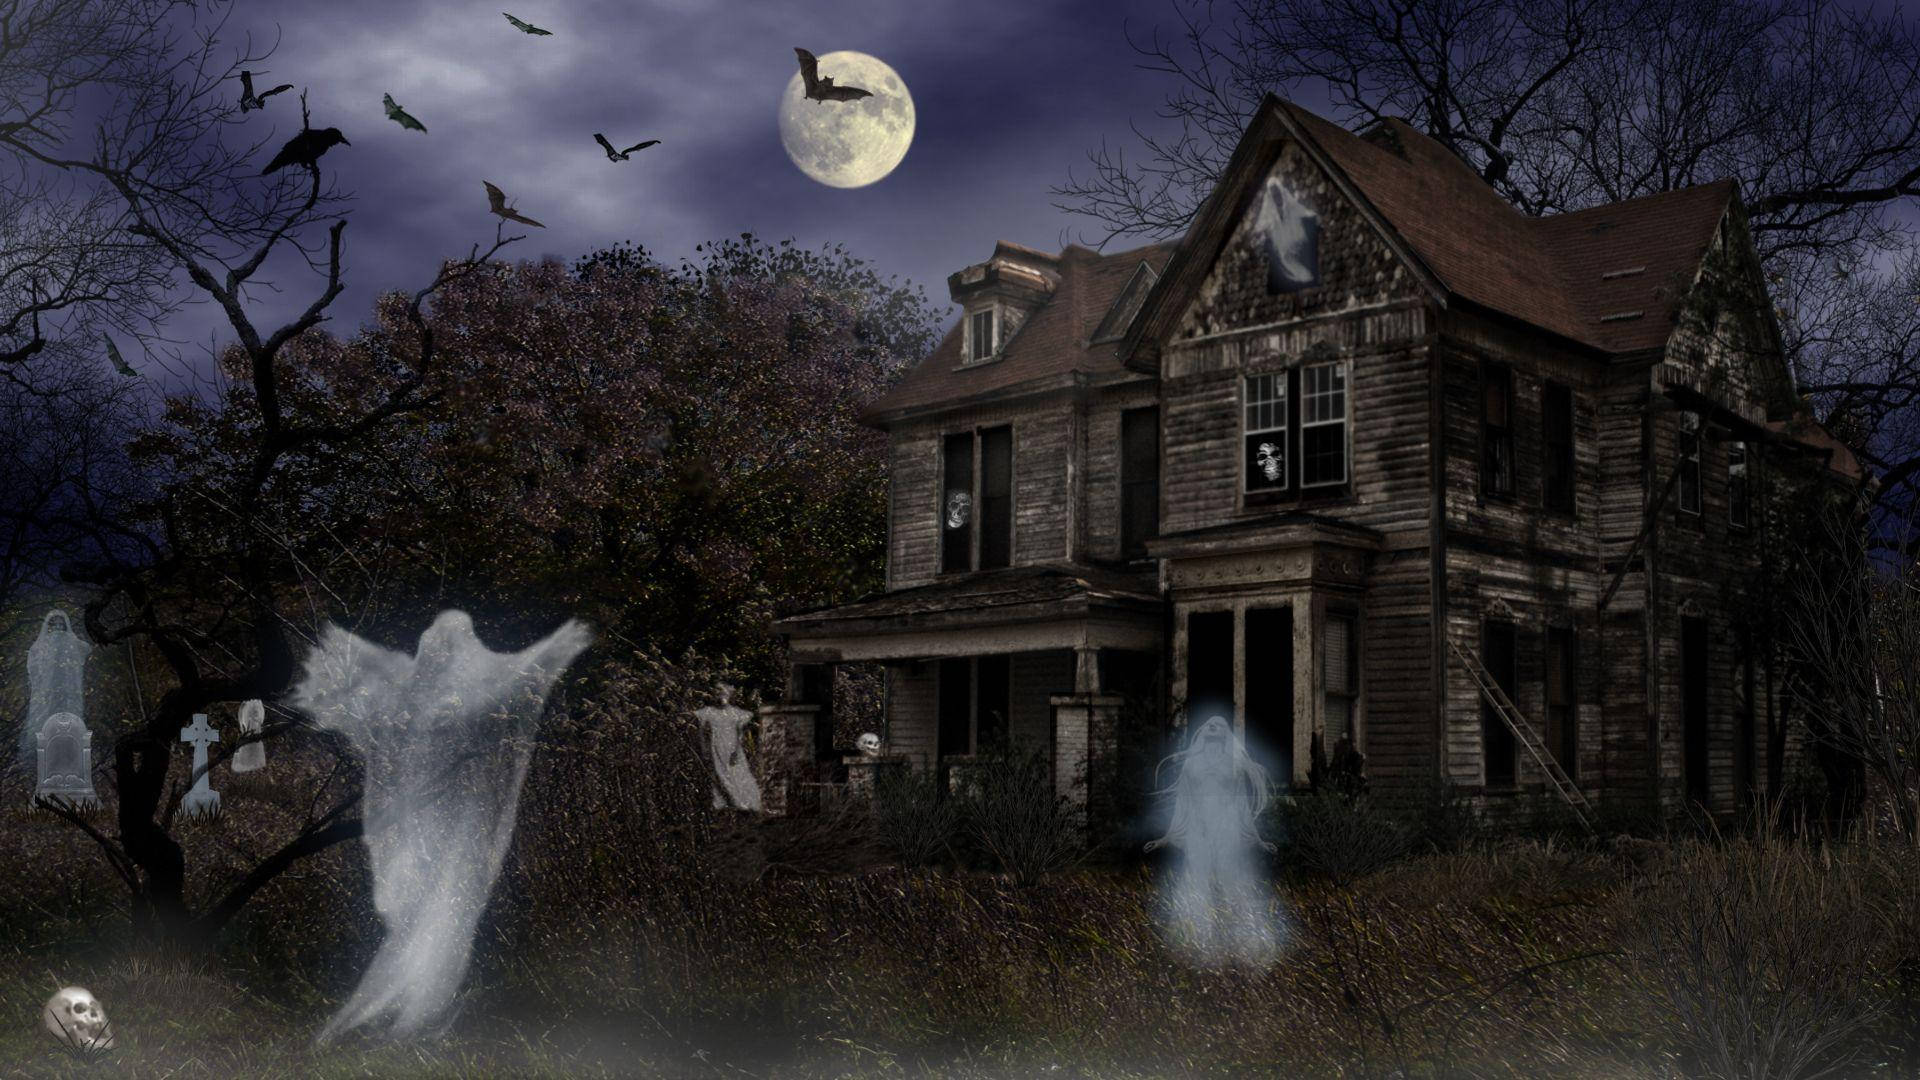 A Mysterious And Spooky Haunted House On Halloween Night. Wallpaper